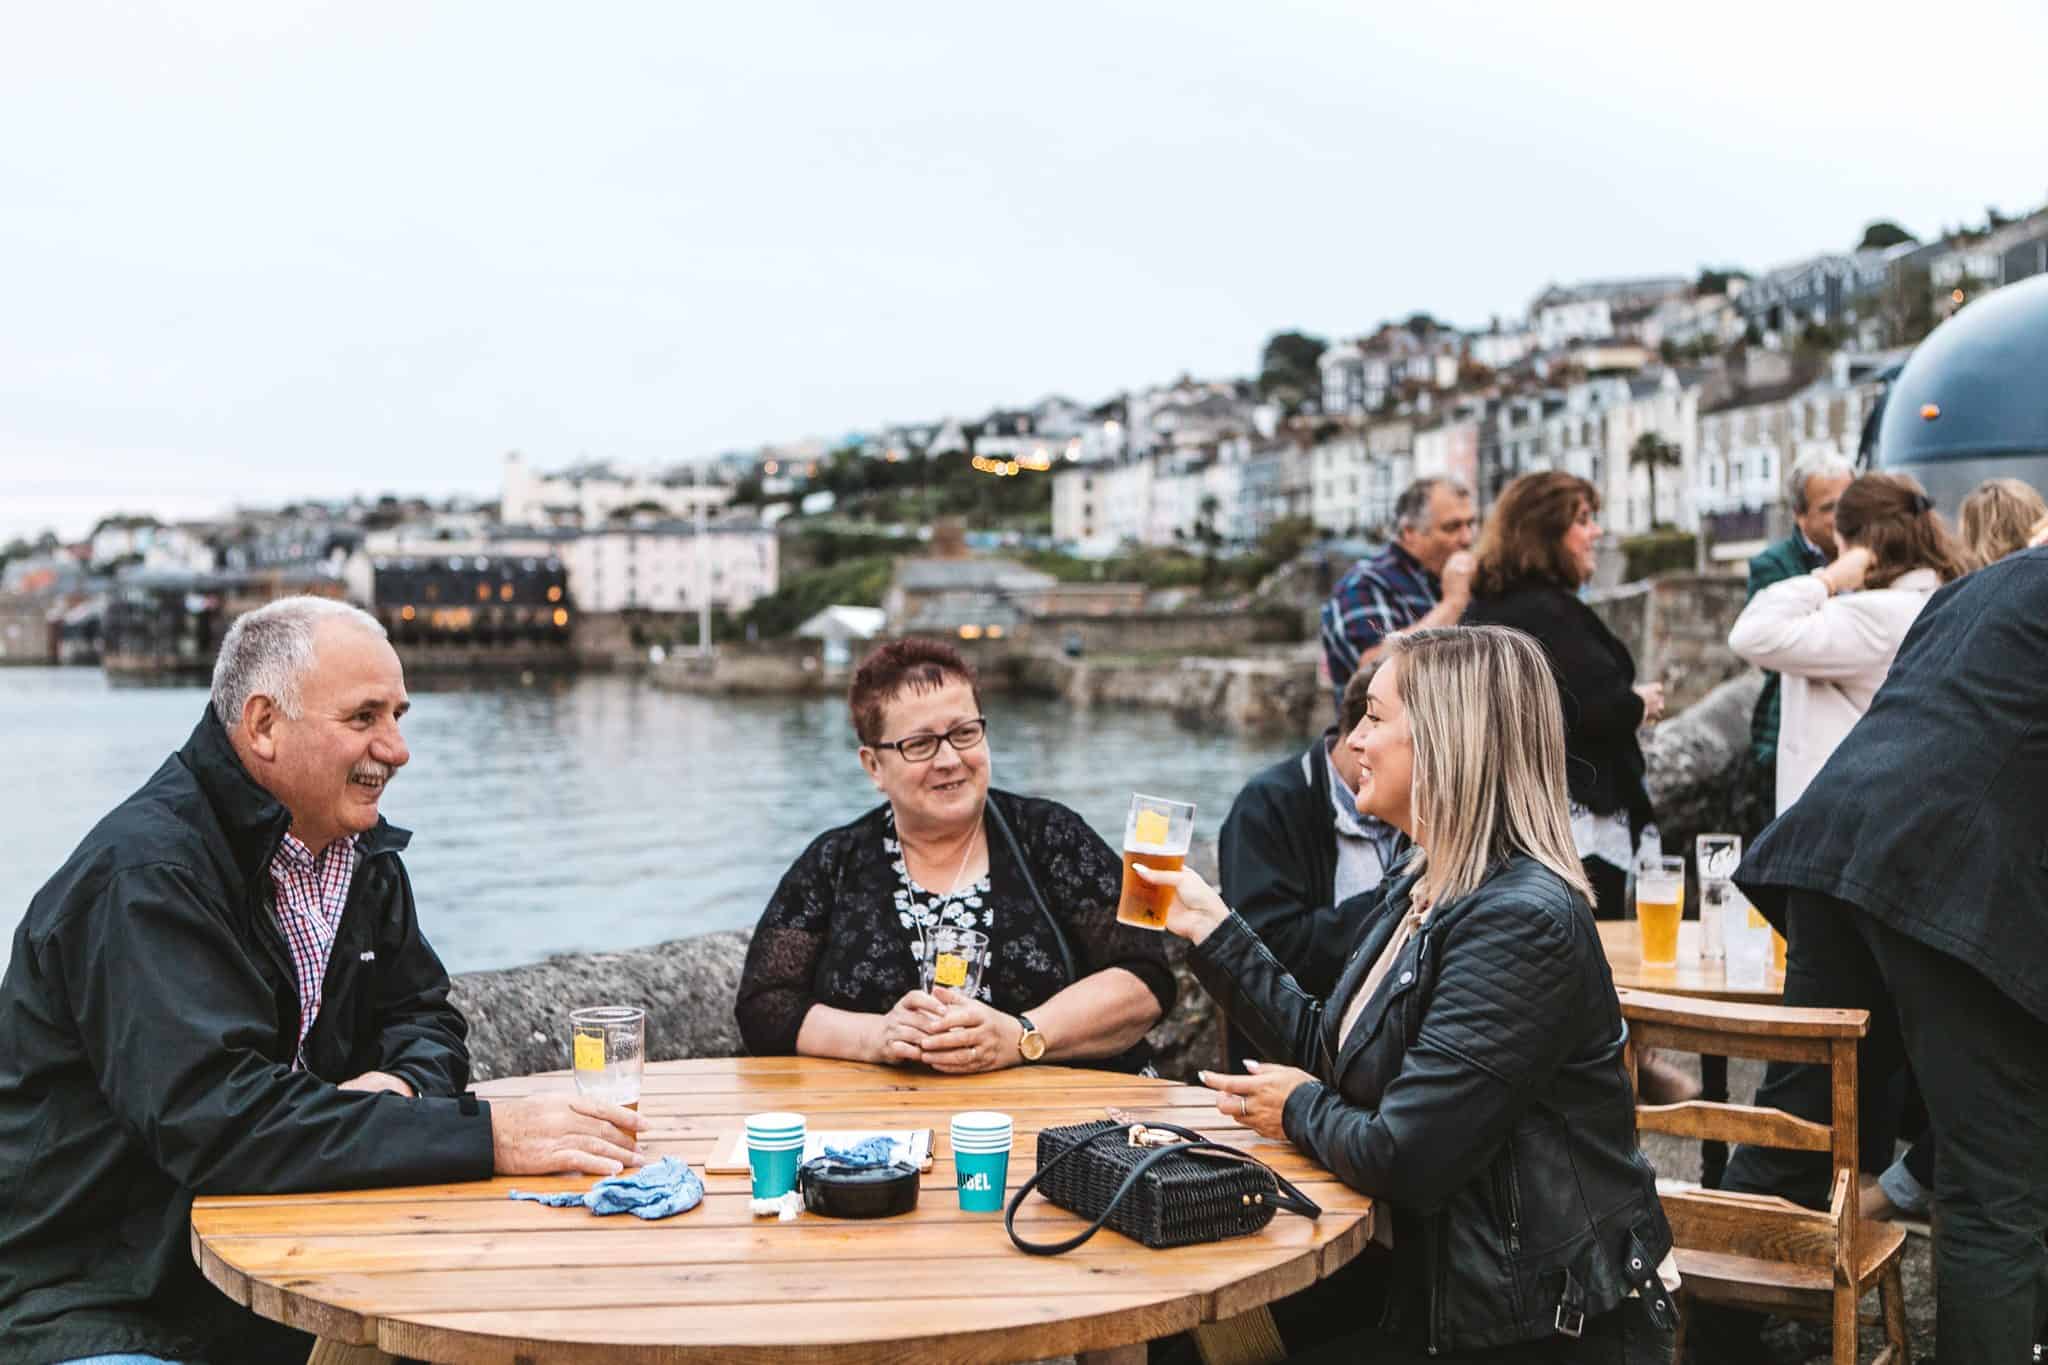 falmouth-week-at-the-working-boat-pub-live-music-events-falmouth-cornwall (28 of 114)